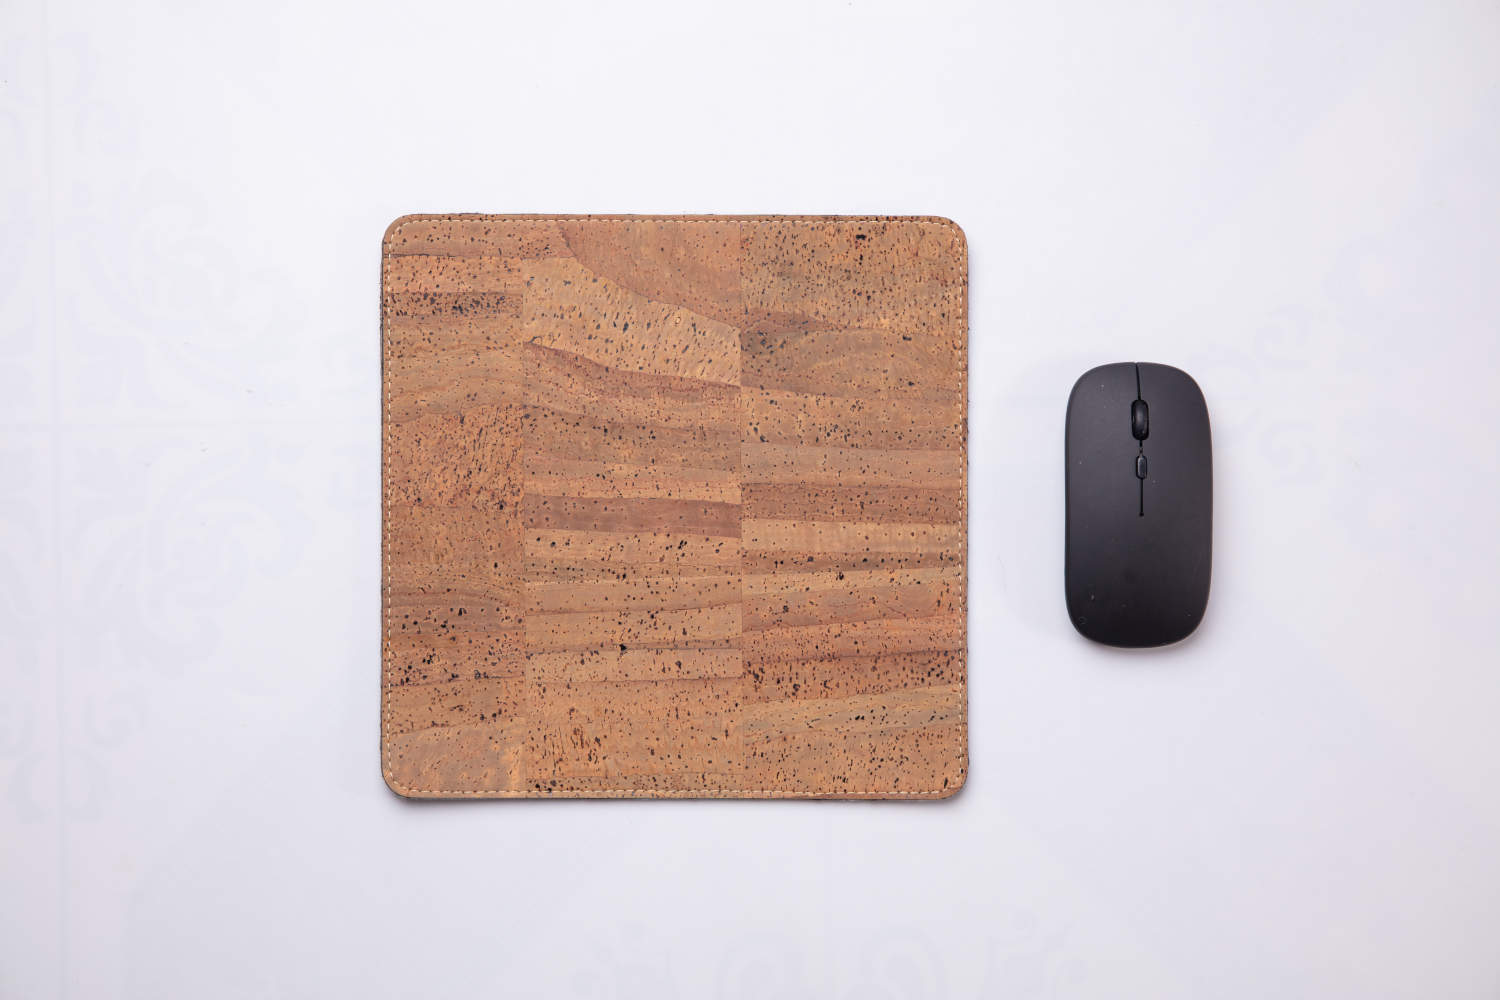 Tan travel mousepad next to wireless mouse against white background